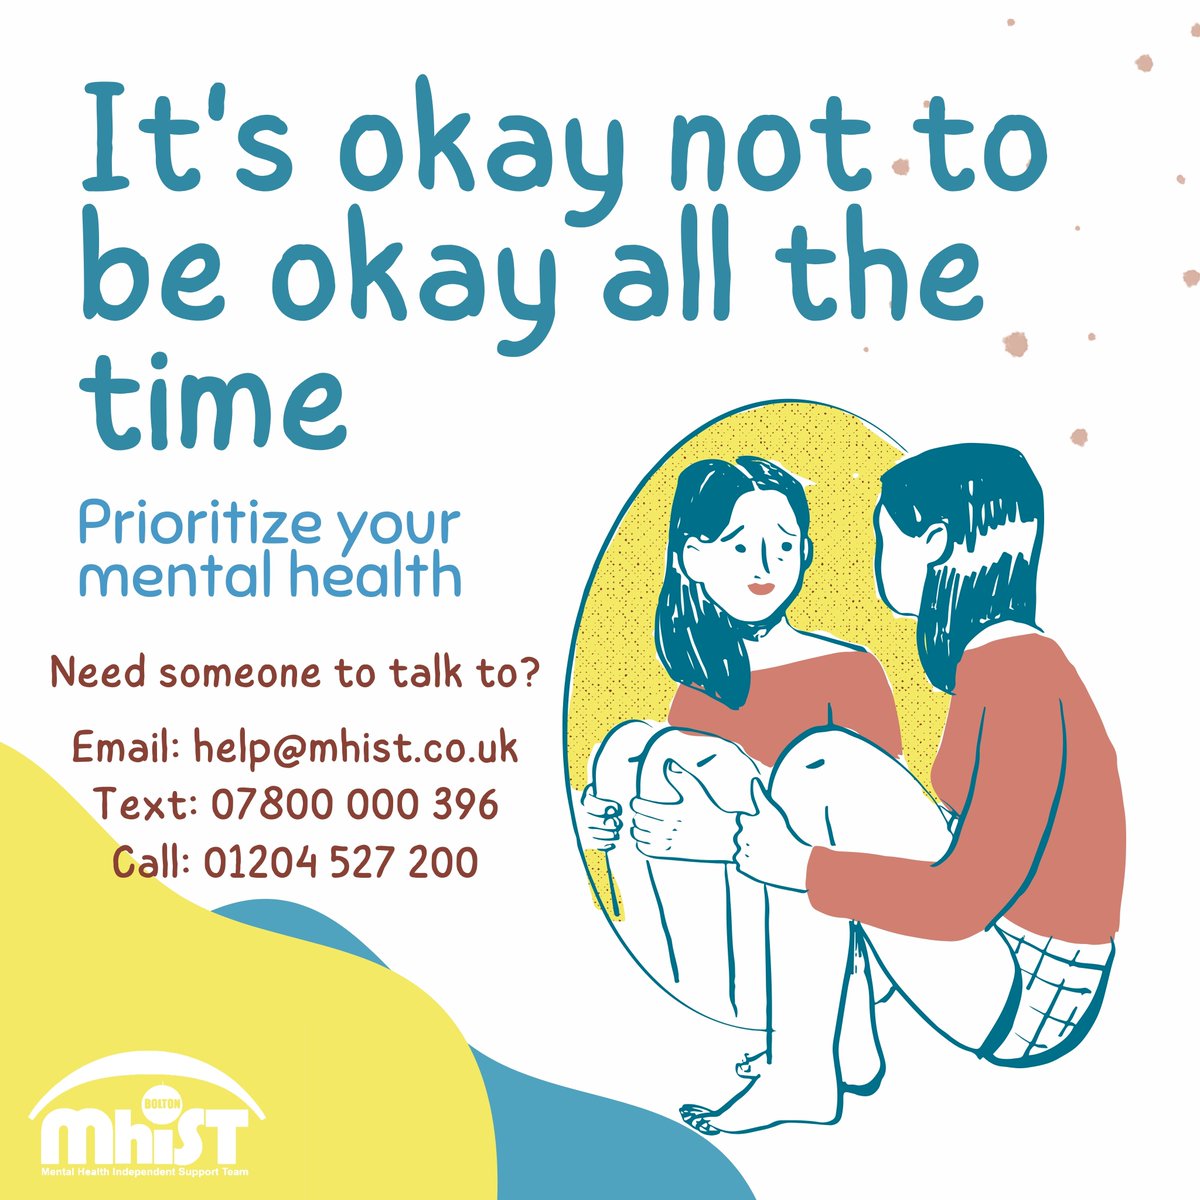 In a world that often celebrates strength and happiness, it's important to remember that it's completely alright not to be okay all the time. Need someone to talk to? Email: help@mhist.co.uk Text: 07800 000 396 Call: 01204 527 200